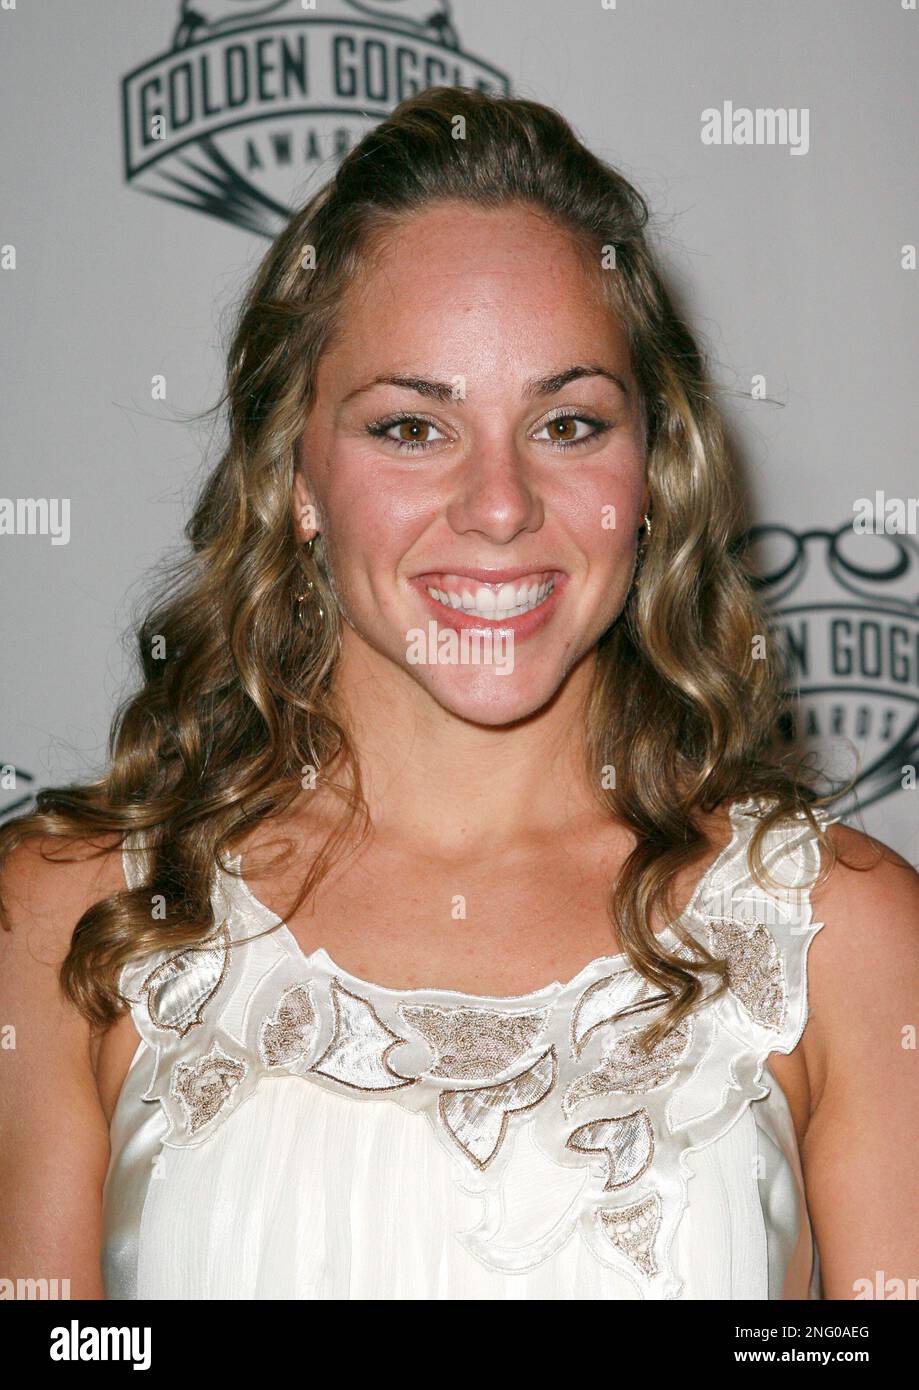 Swimmer Whitney Myers Arrives At The Usa Swimming Foundation S Golden Goggle Awards In The